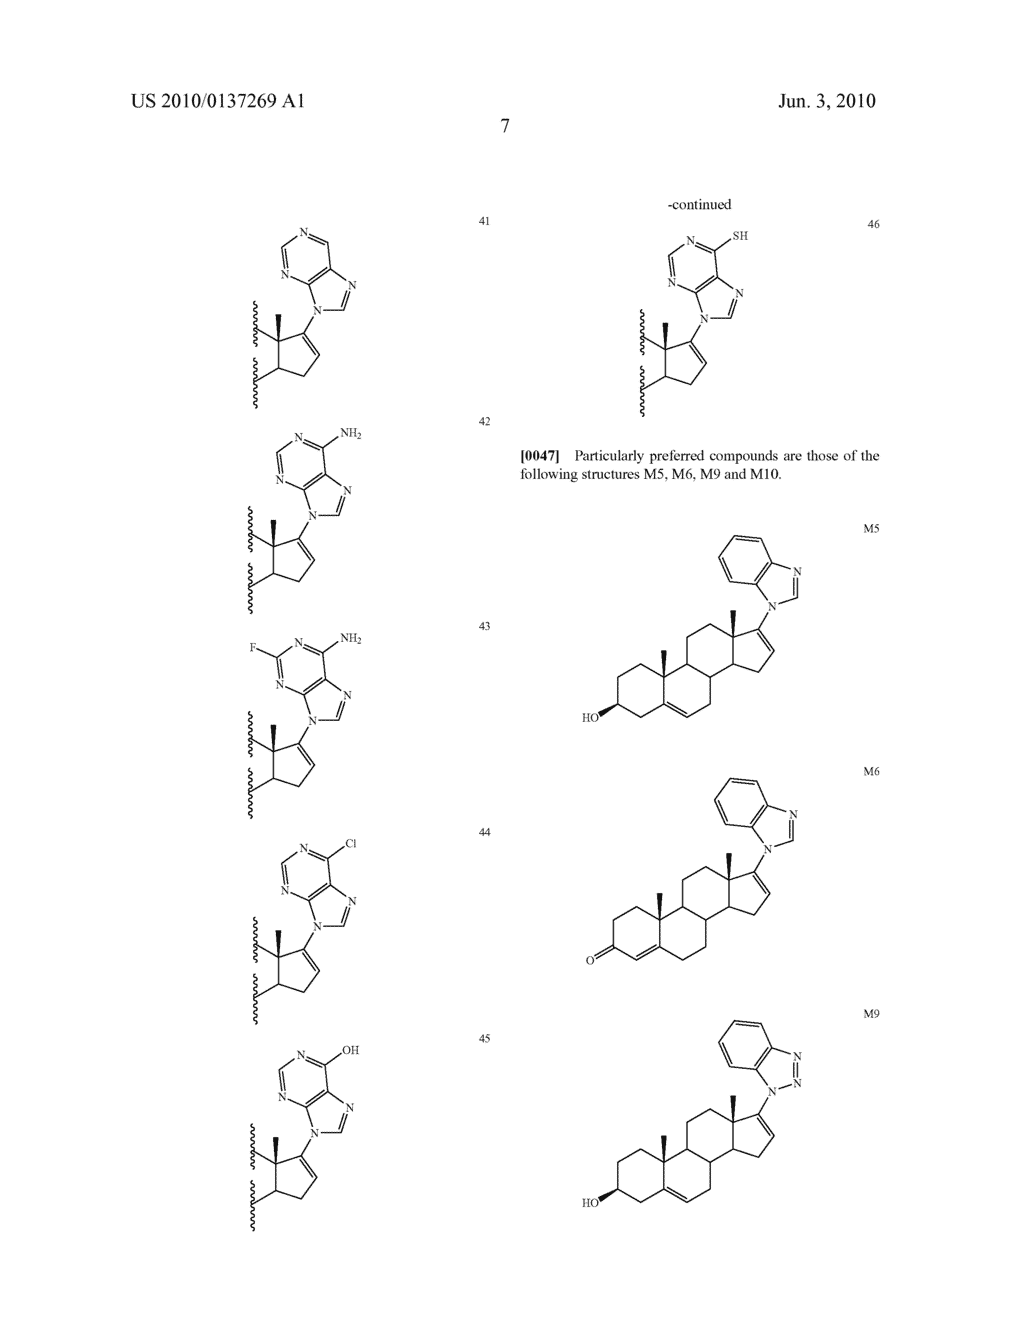 Novel C-17-Heteroaryl Steroidal Cyp17 Inhibitors/Antiandrogens: Synehesis, In Vitro Biological Activities, Pharmacokinetics and Antitumor Activity - diagram, schematic, and image 16